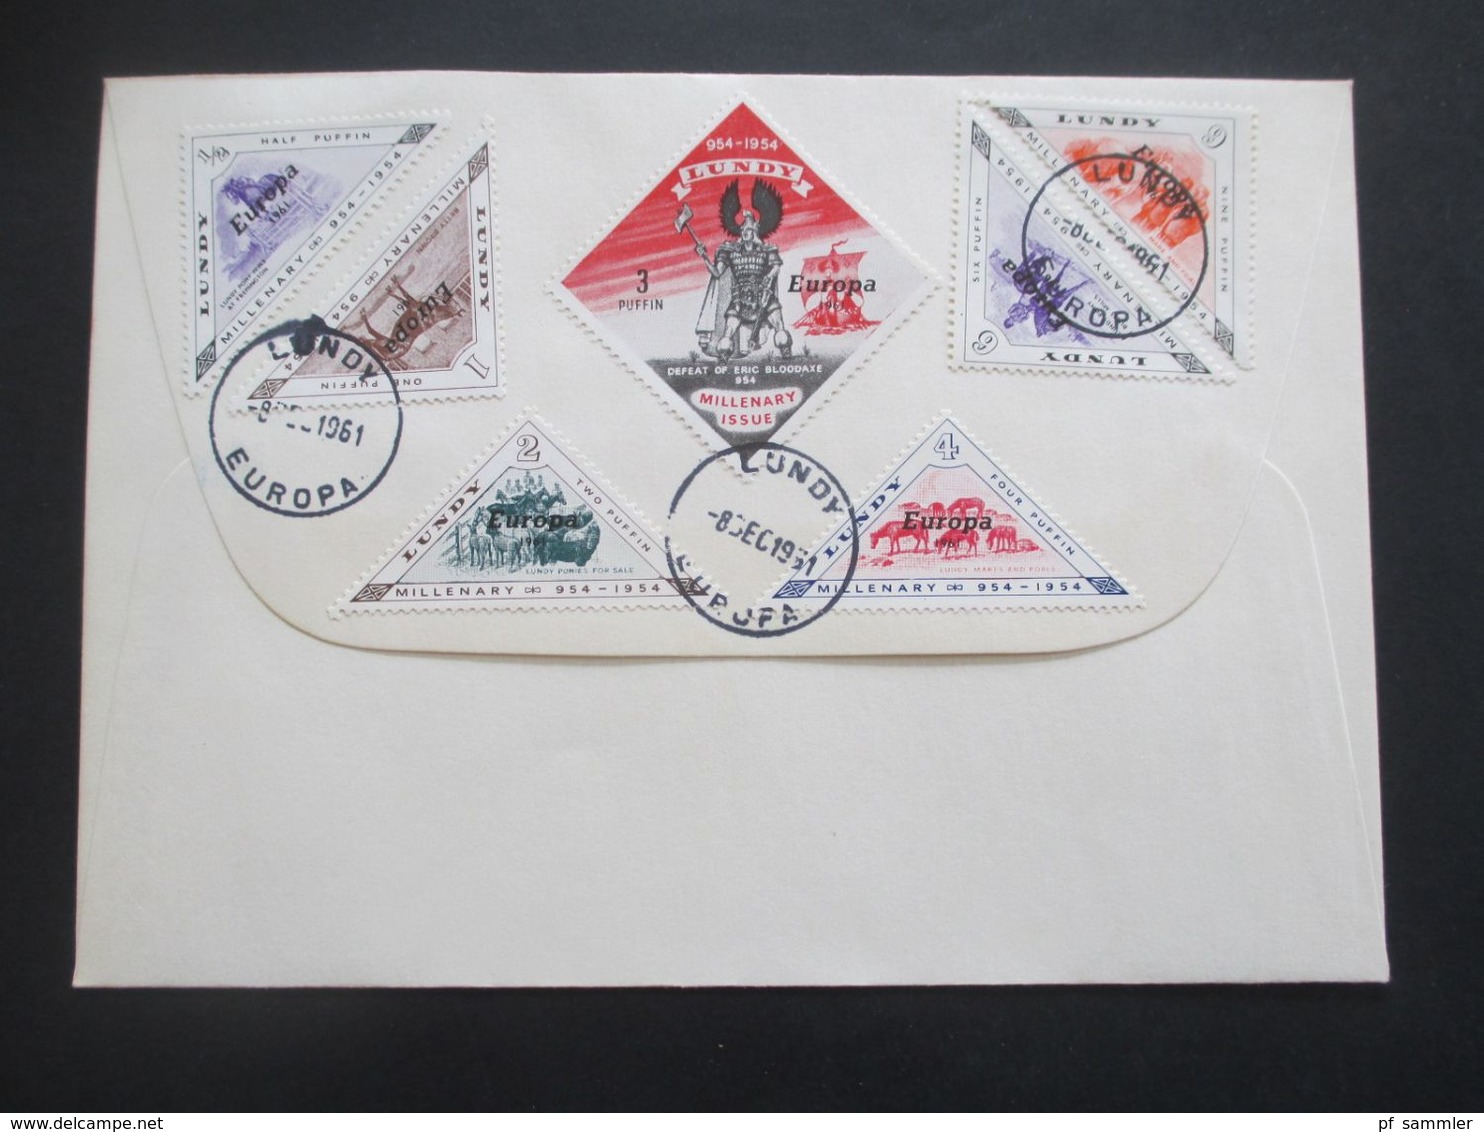 GB Lundy 1961 Europa Cept Schmuck FDC Lundy Marken Millenary 954 - 1954 - Covers & Documents